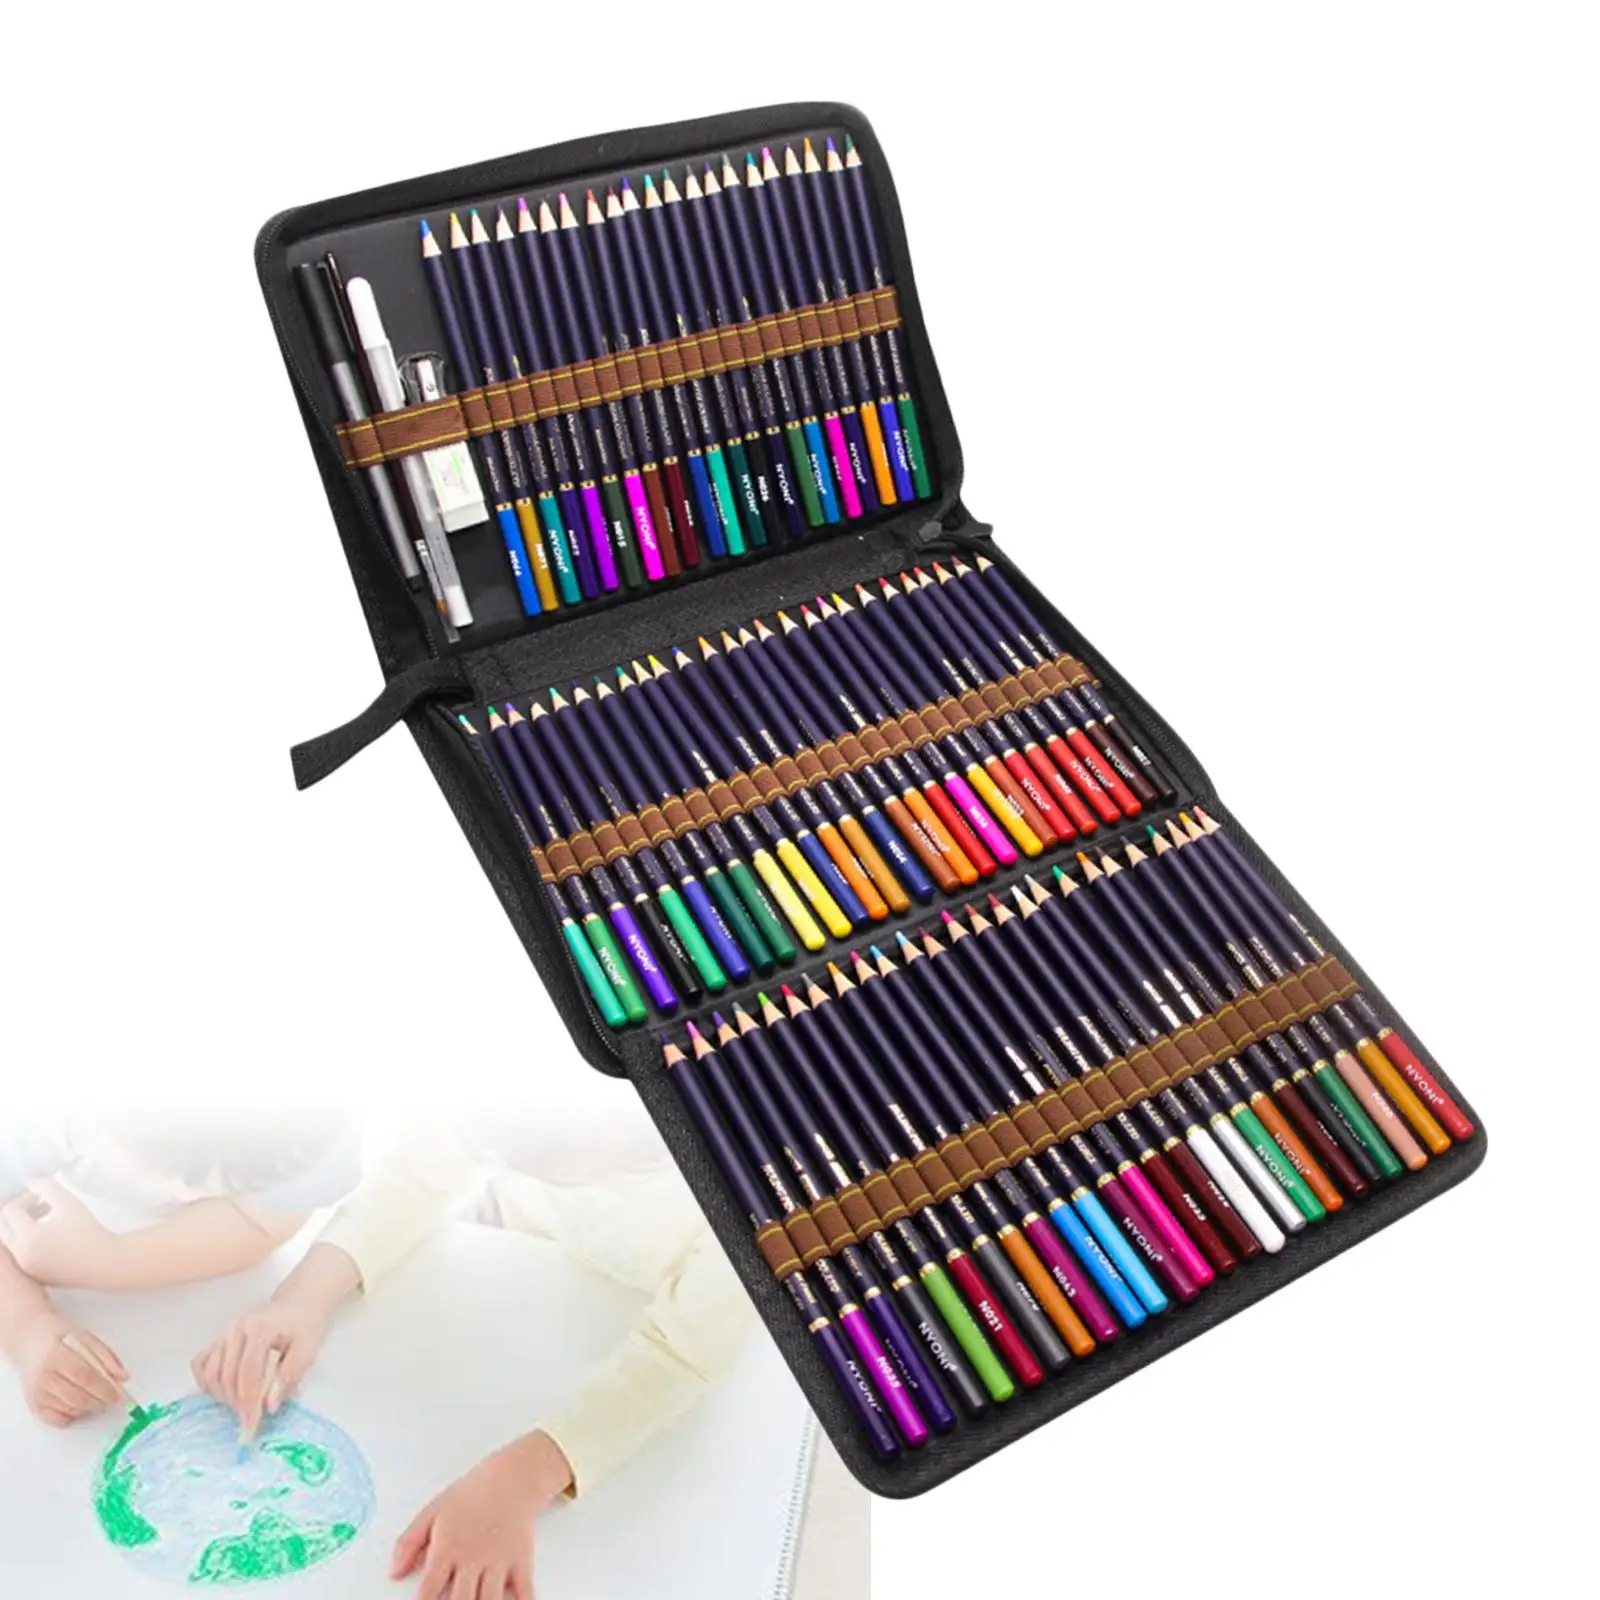 72 Colored Pencils for Coloring Books, Coloring Pencils Set with Vibrant Color, Kids Gifts for Colorist Drawing, Painting